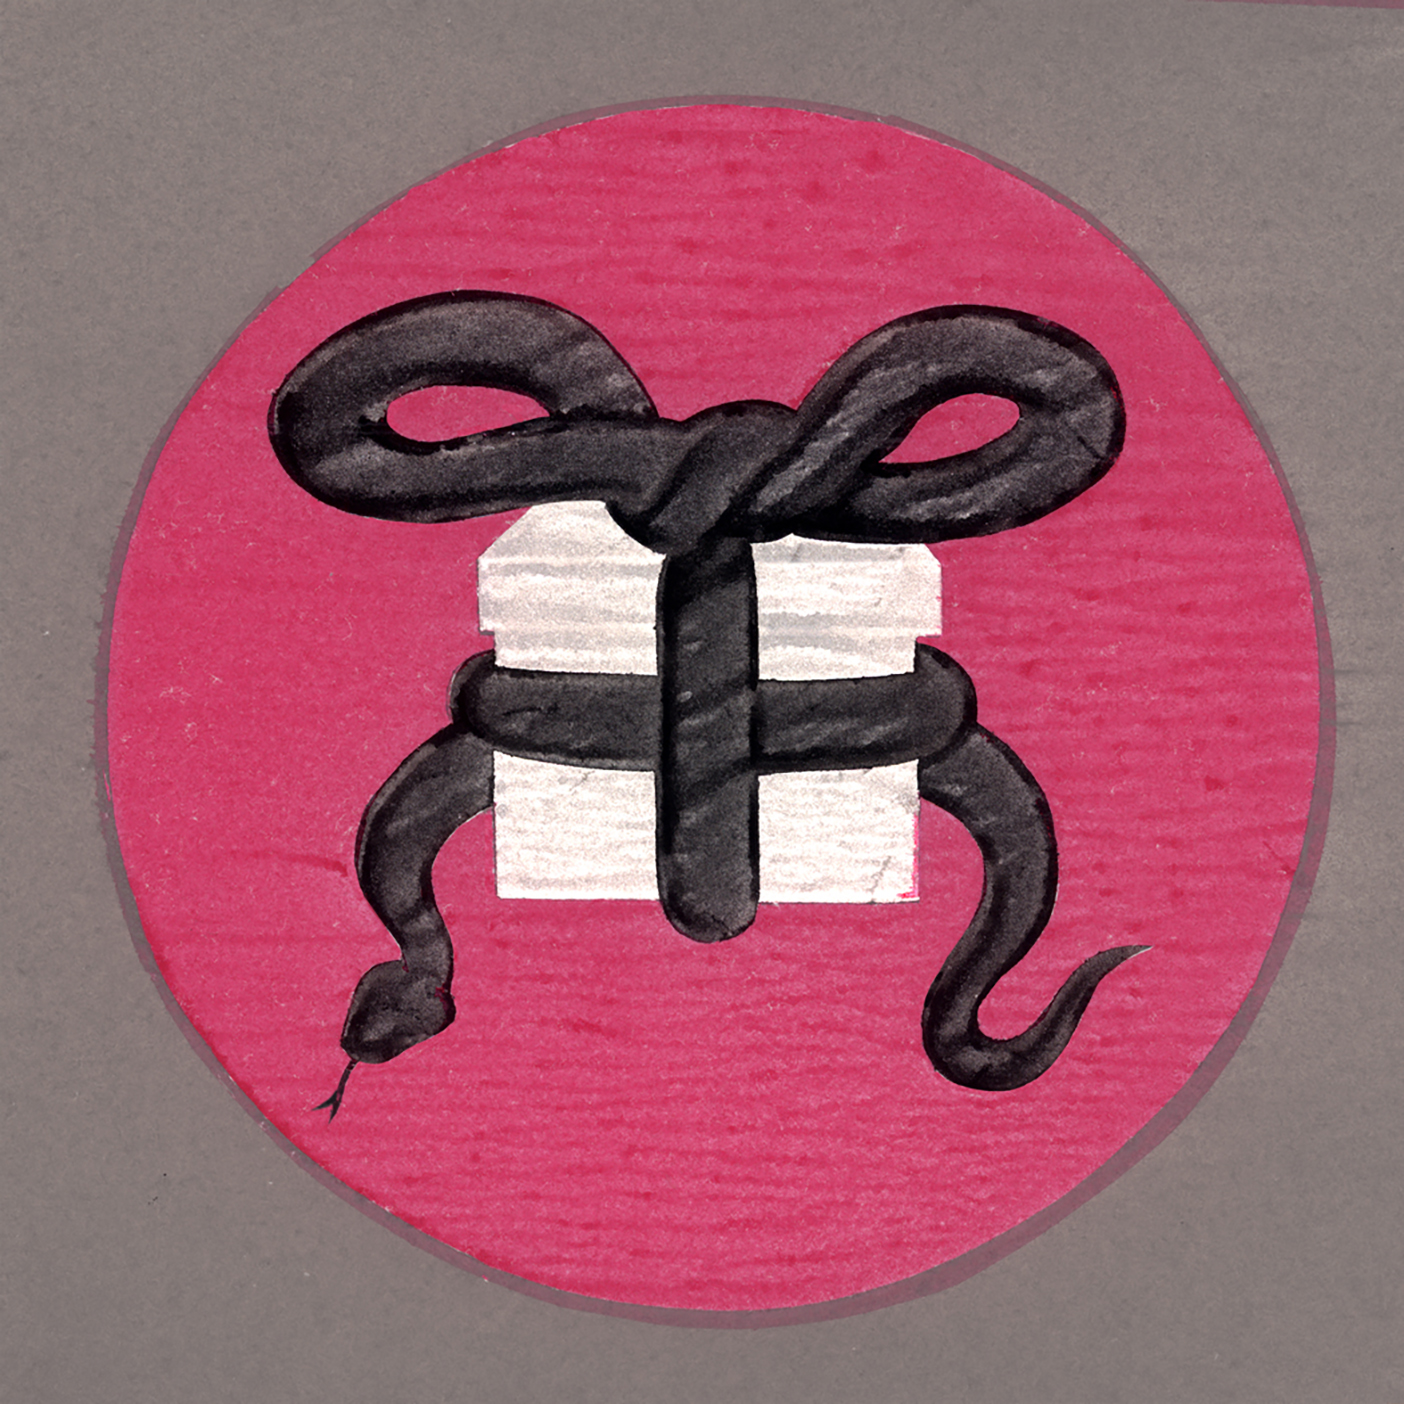 Conceptual image of a present; a snake is the ribbon on the box.